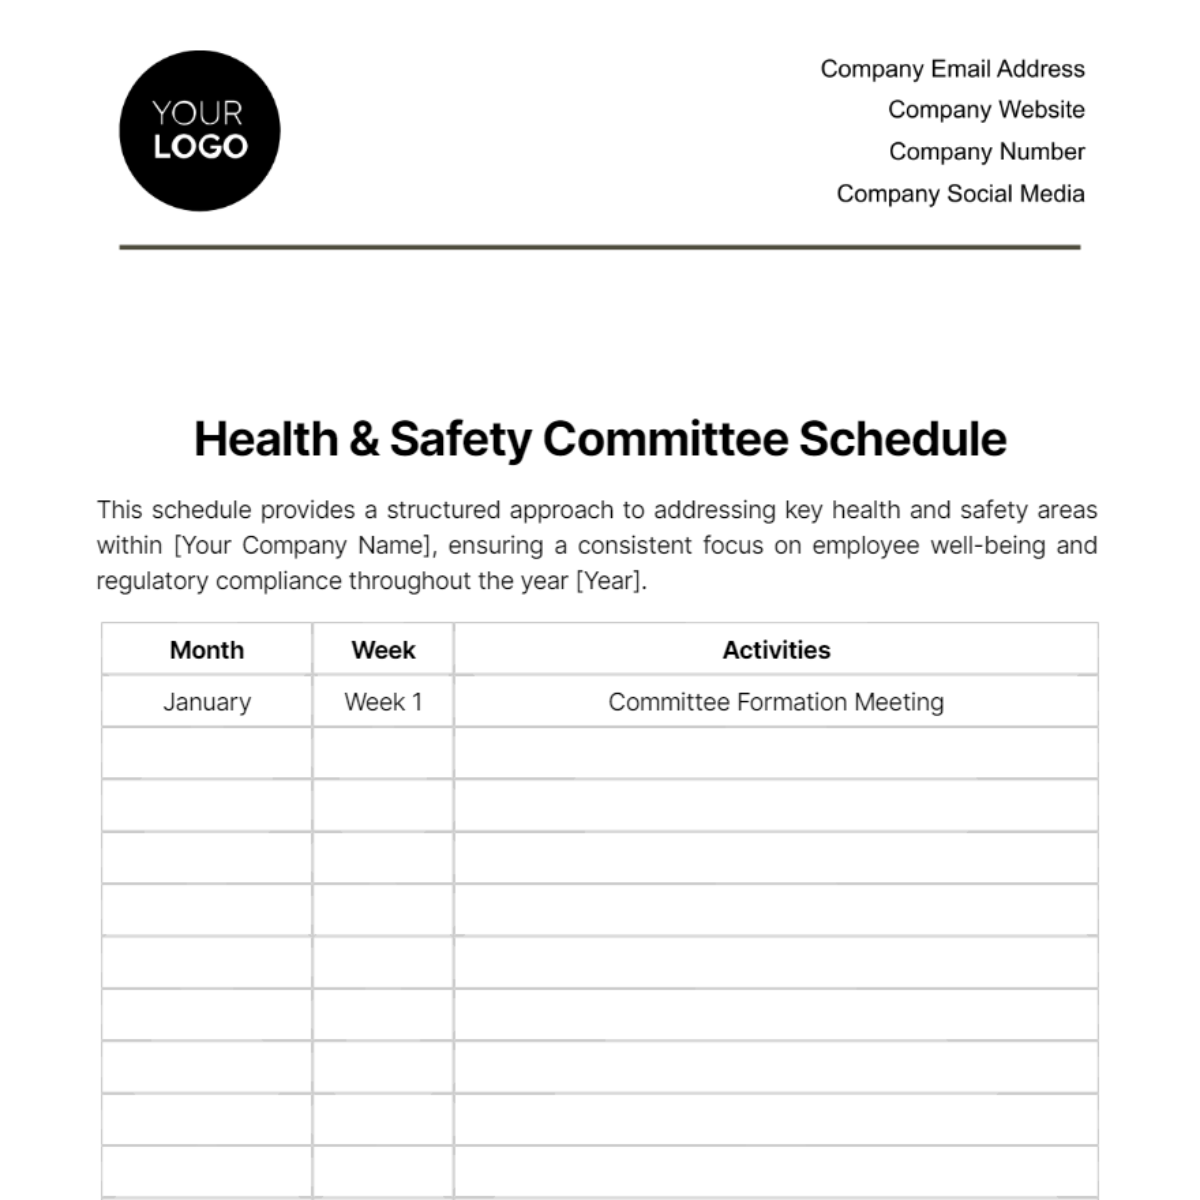 Health & Safety Committee Schedule Template